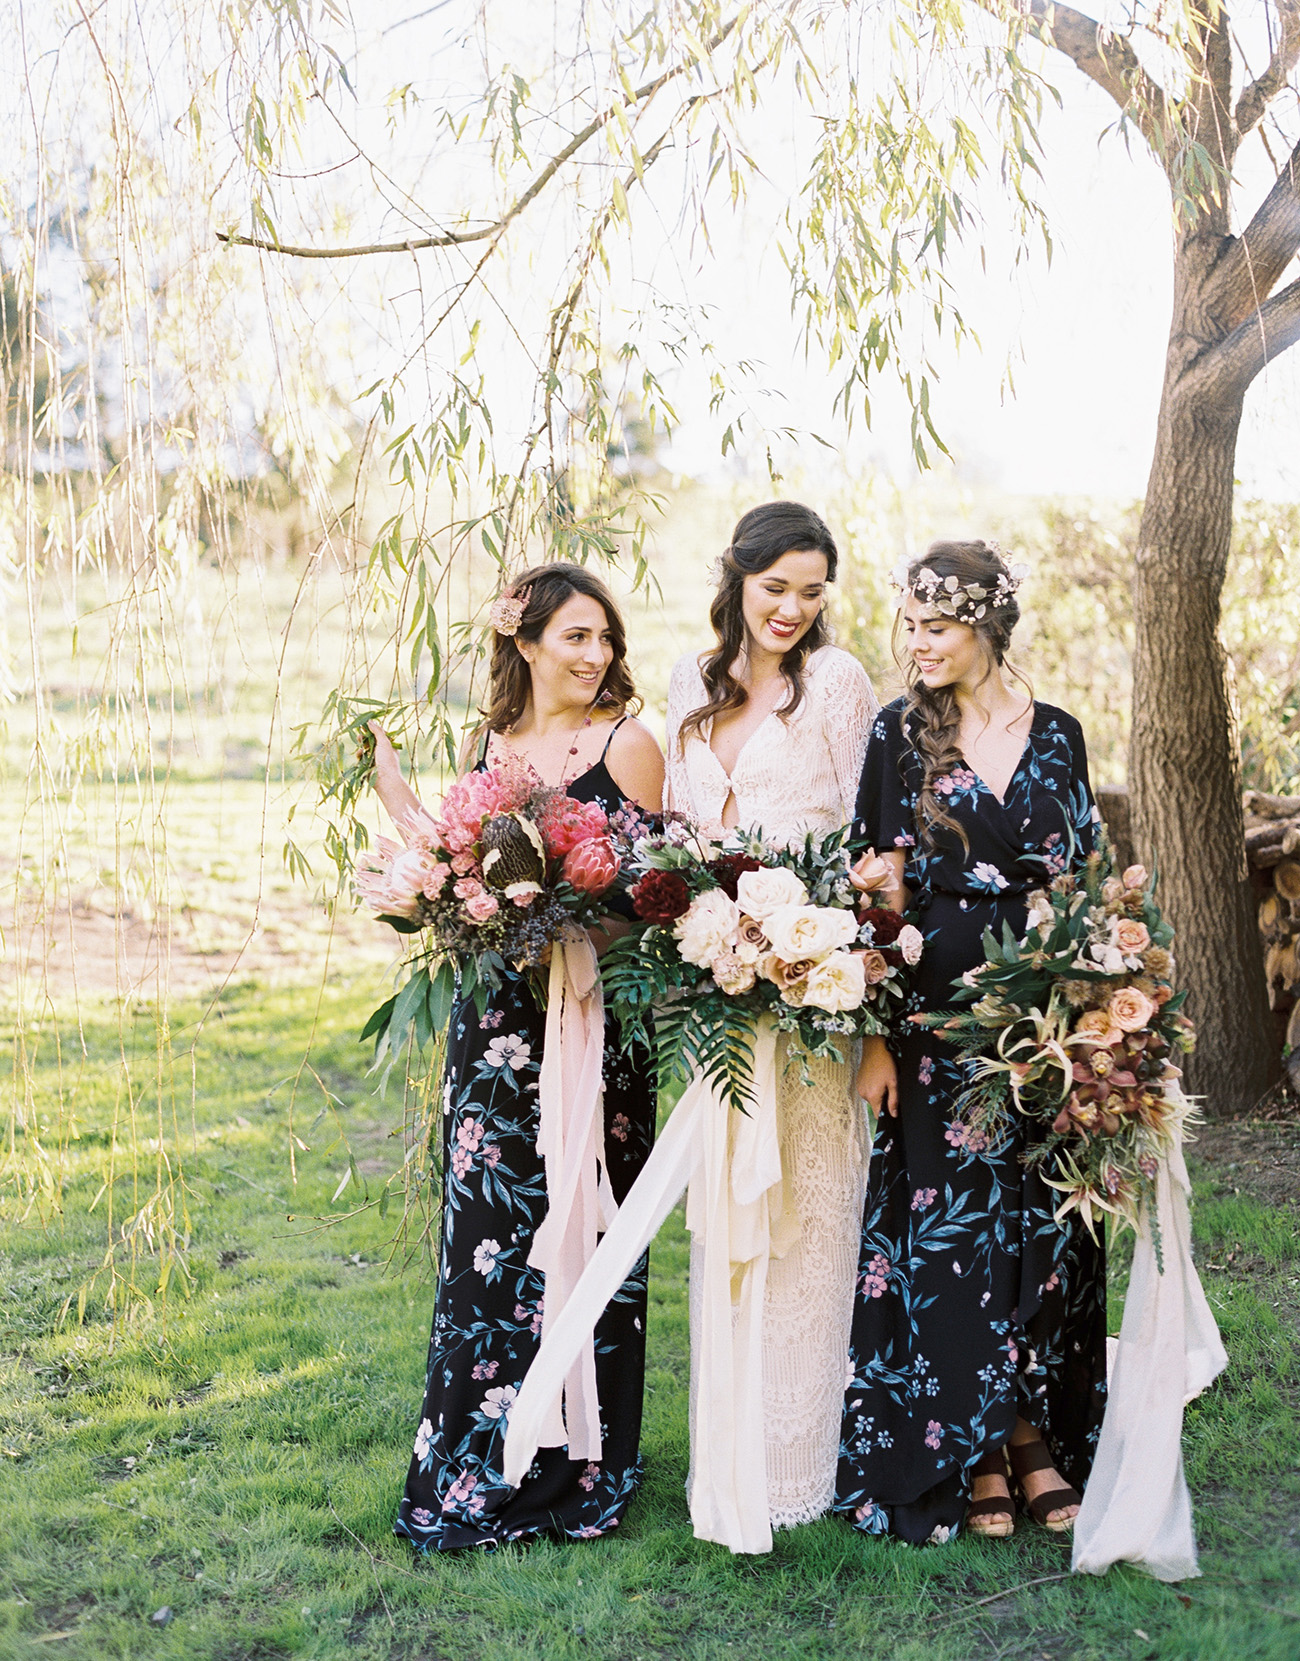 Show Me Your Mumu x Green Wedding Shoes bridesmaids dresses with a Daughers of Simone gown